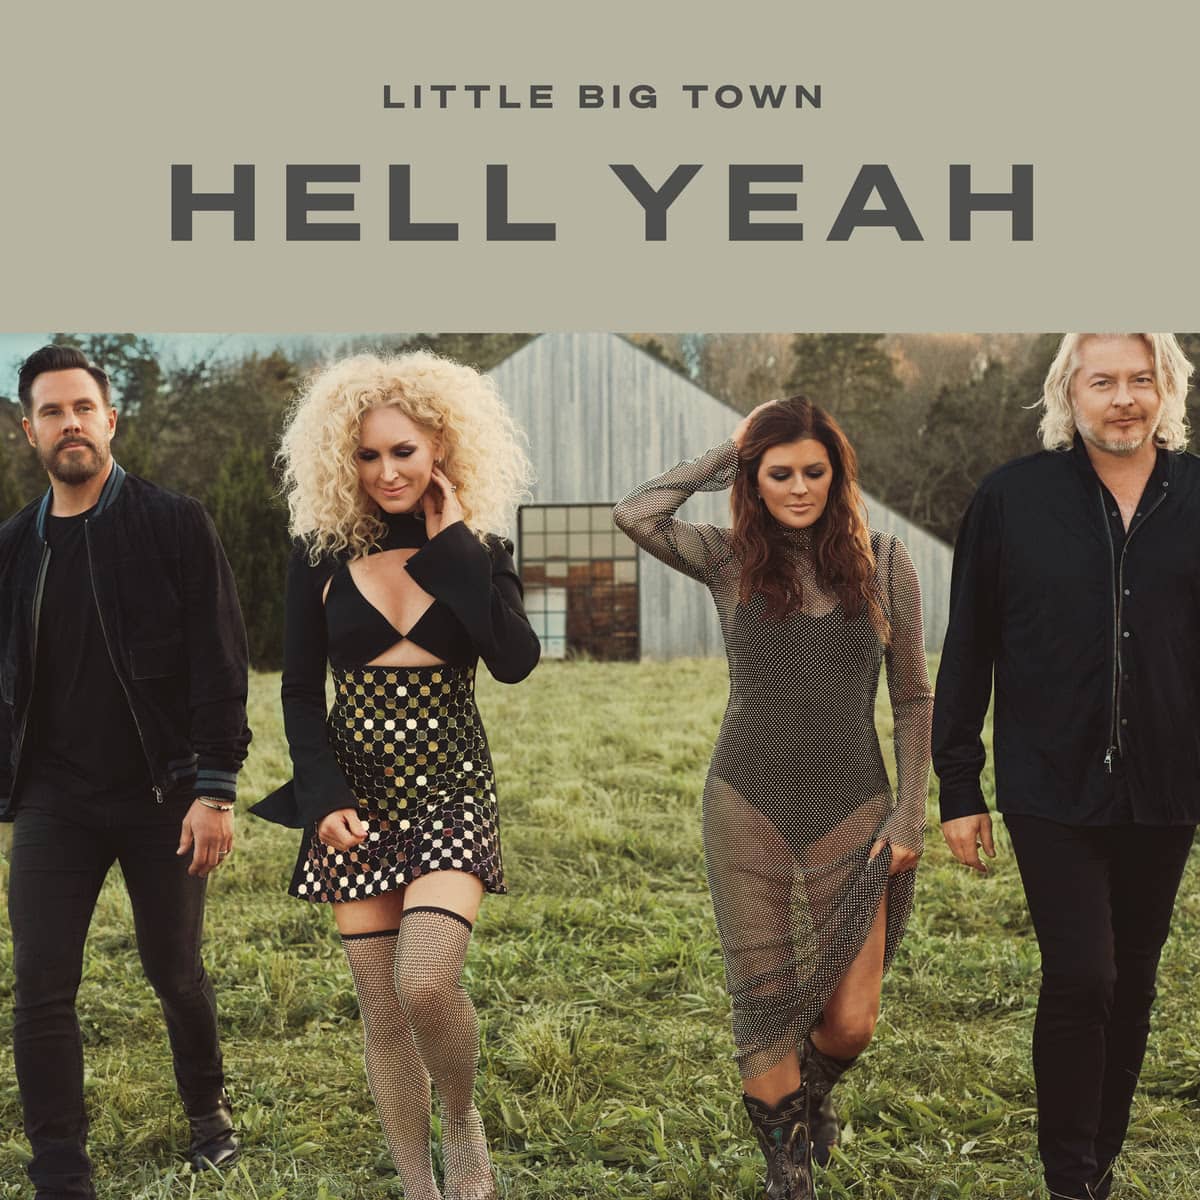 Little Big Town's new song Hell Yeah